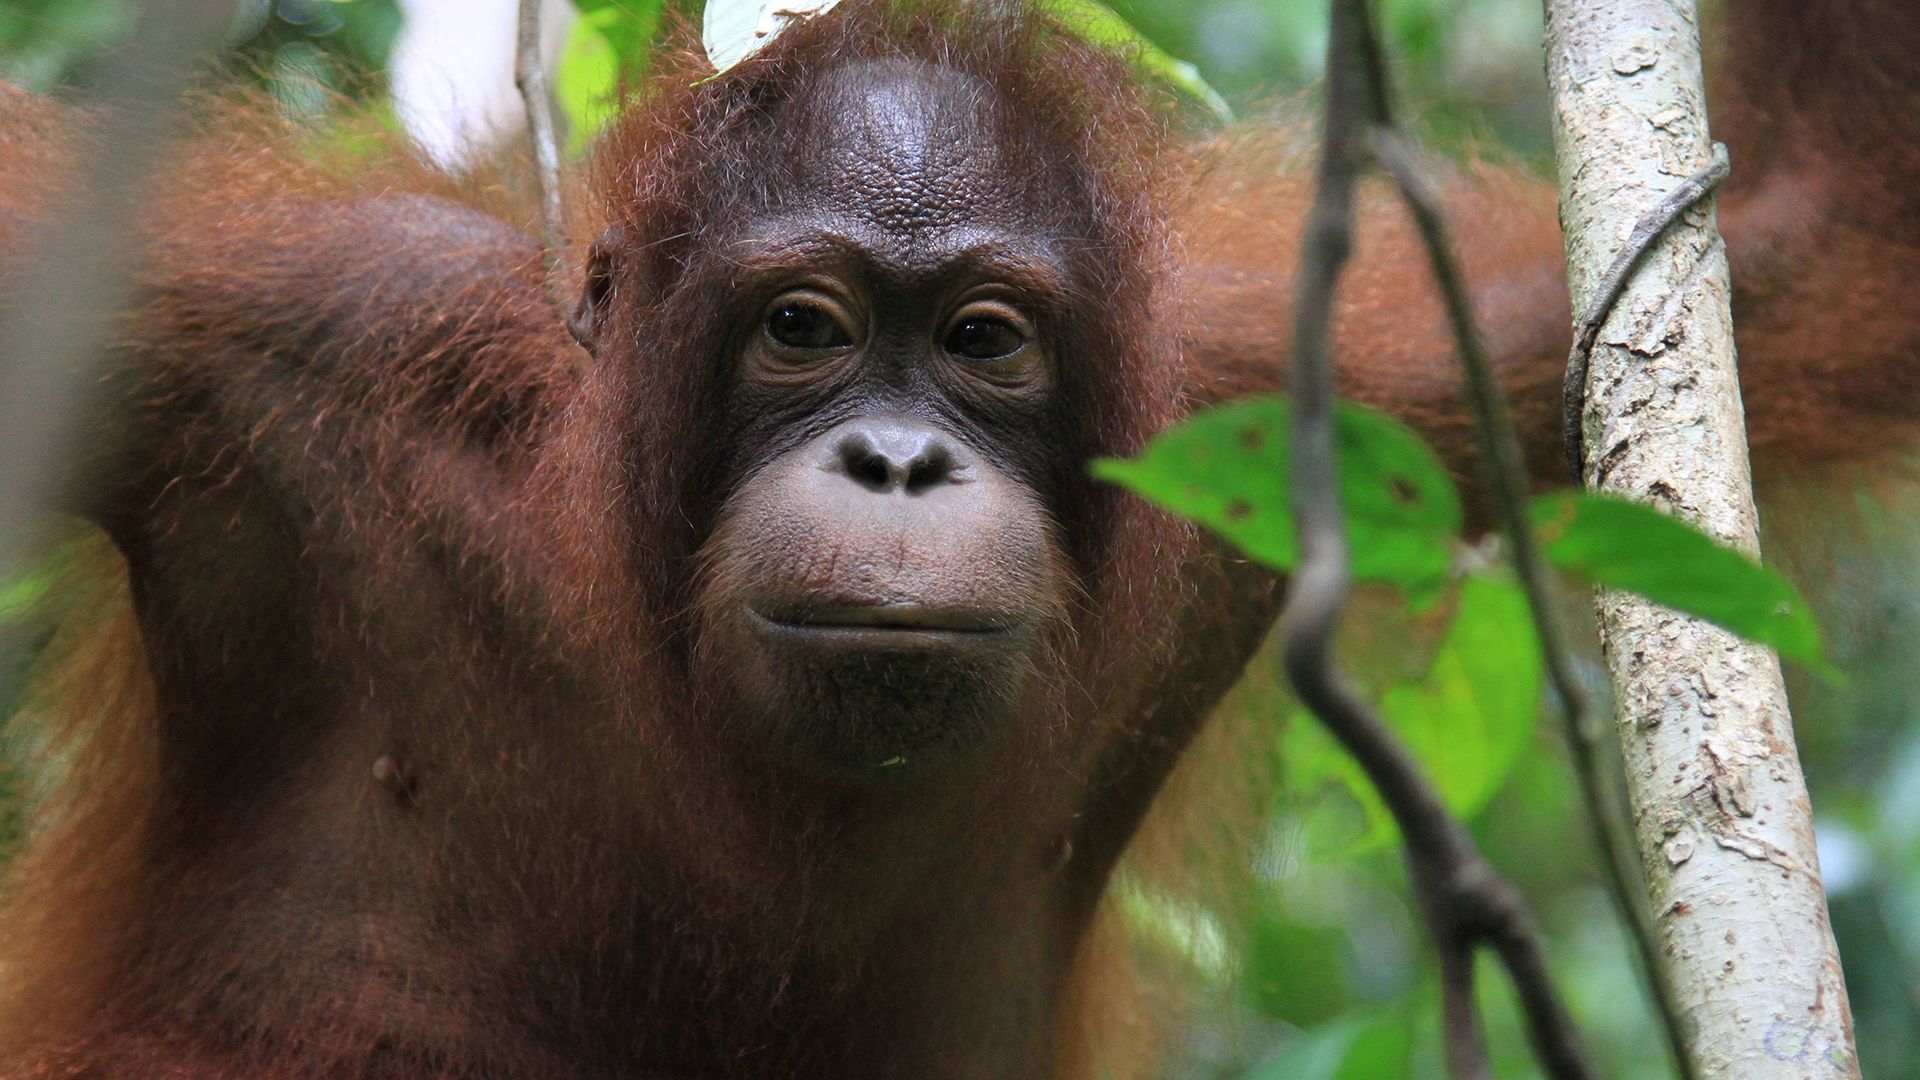 Orangutan in forest canopy. This is from Borneo's Secret Kingdom. [Photo of the day - November 2021]